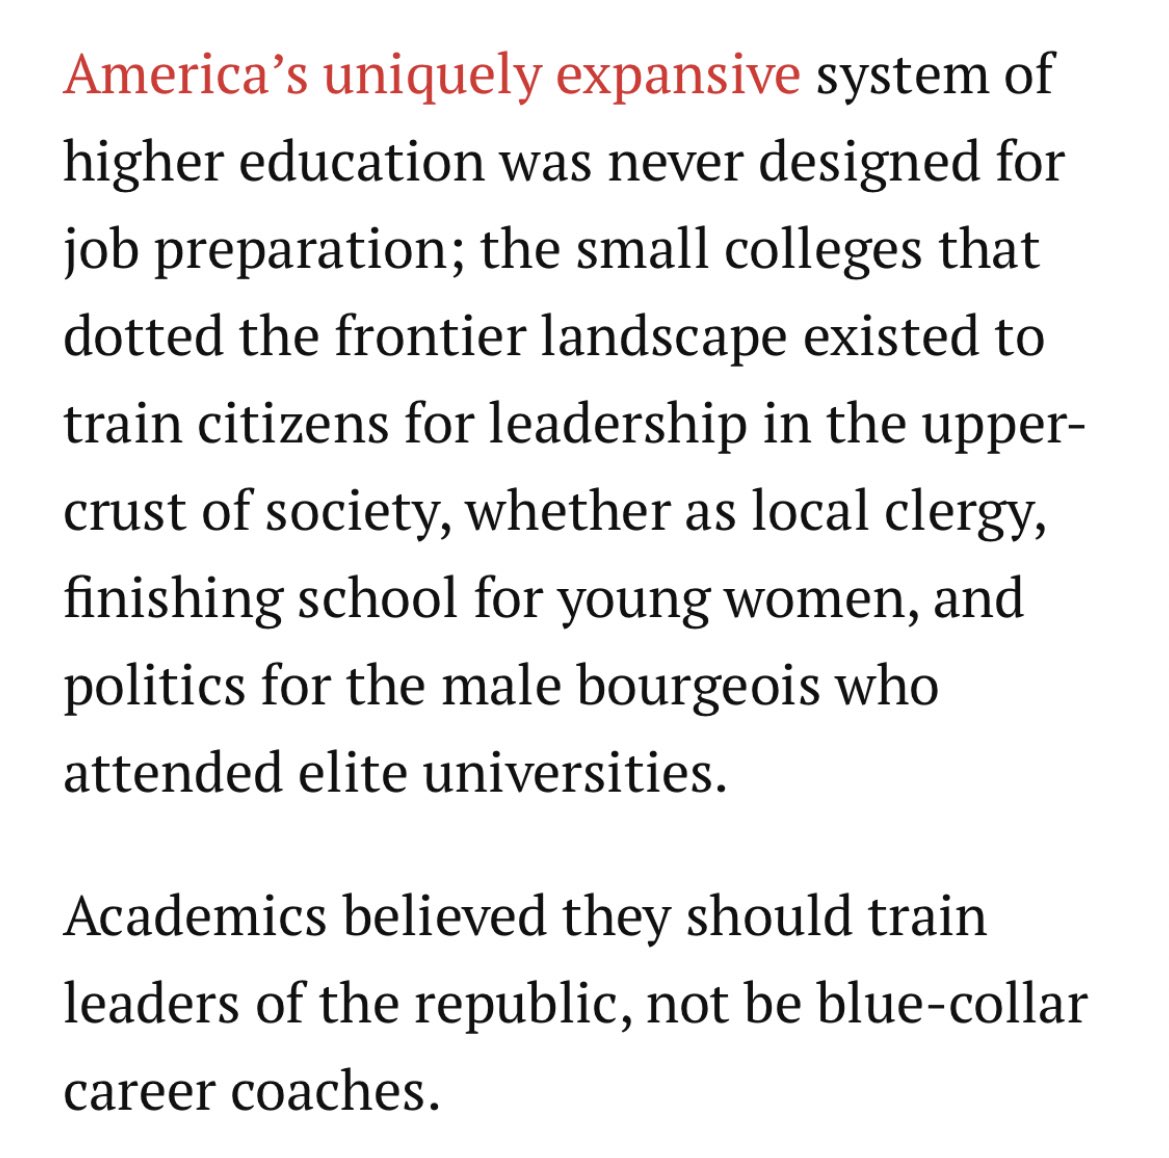 Meanwhile, the university system considered itself largely a finishing school for the elite and wealthy leaders of society, and not a fit for job preparation, especially for blue collar jobs.